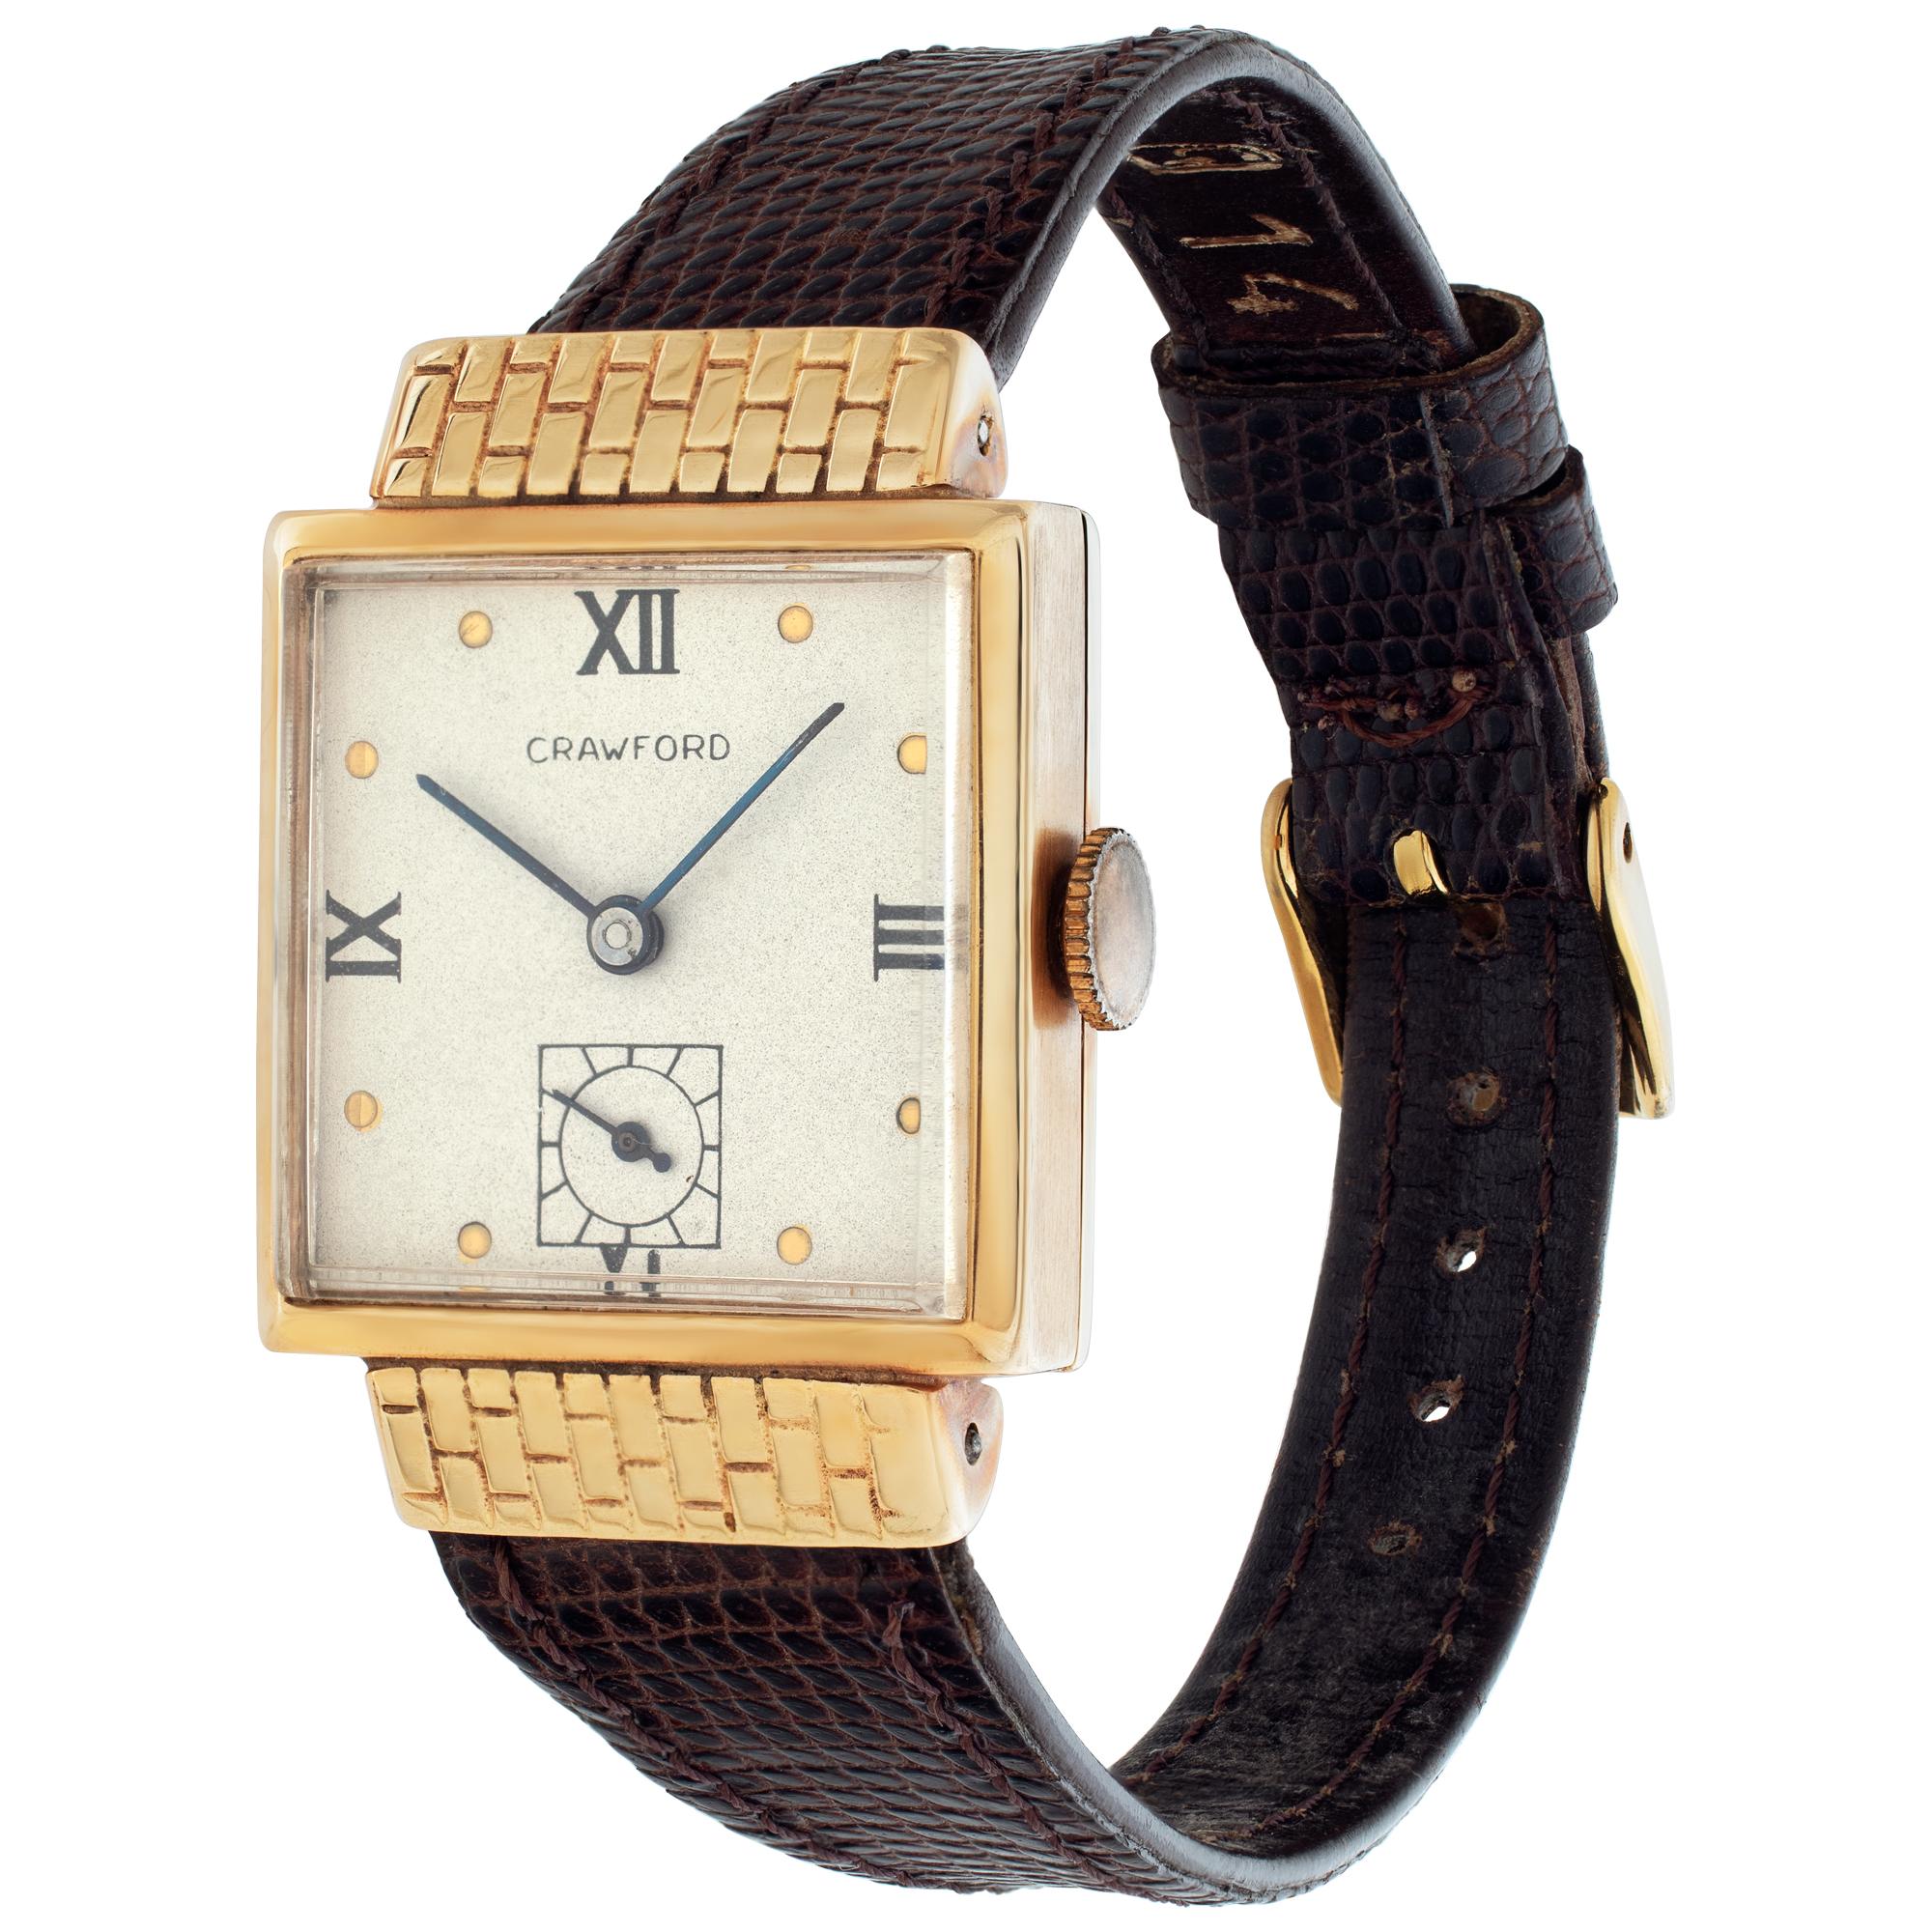 Unisex Crawford 14k yellow gold manual wind watch with 14k bezel and leather leather band with two piece clasp.Subsidary Seconds Hand. Caliber 17 jewel movement. Certified pre-owned. Presentation watch 1945 Fine Pre-owned Crawford Watch. Certified